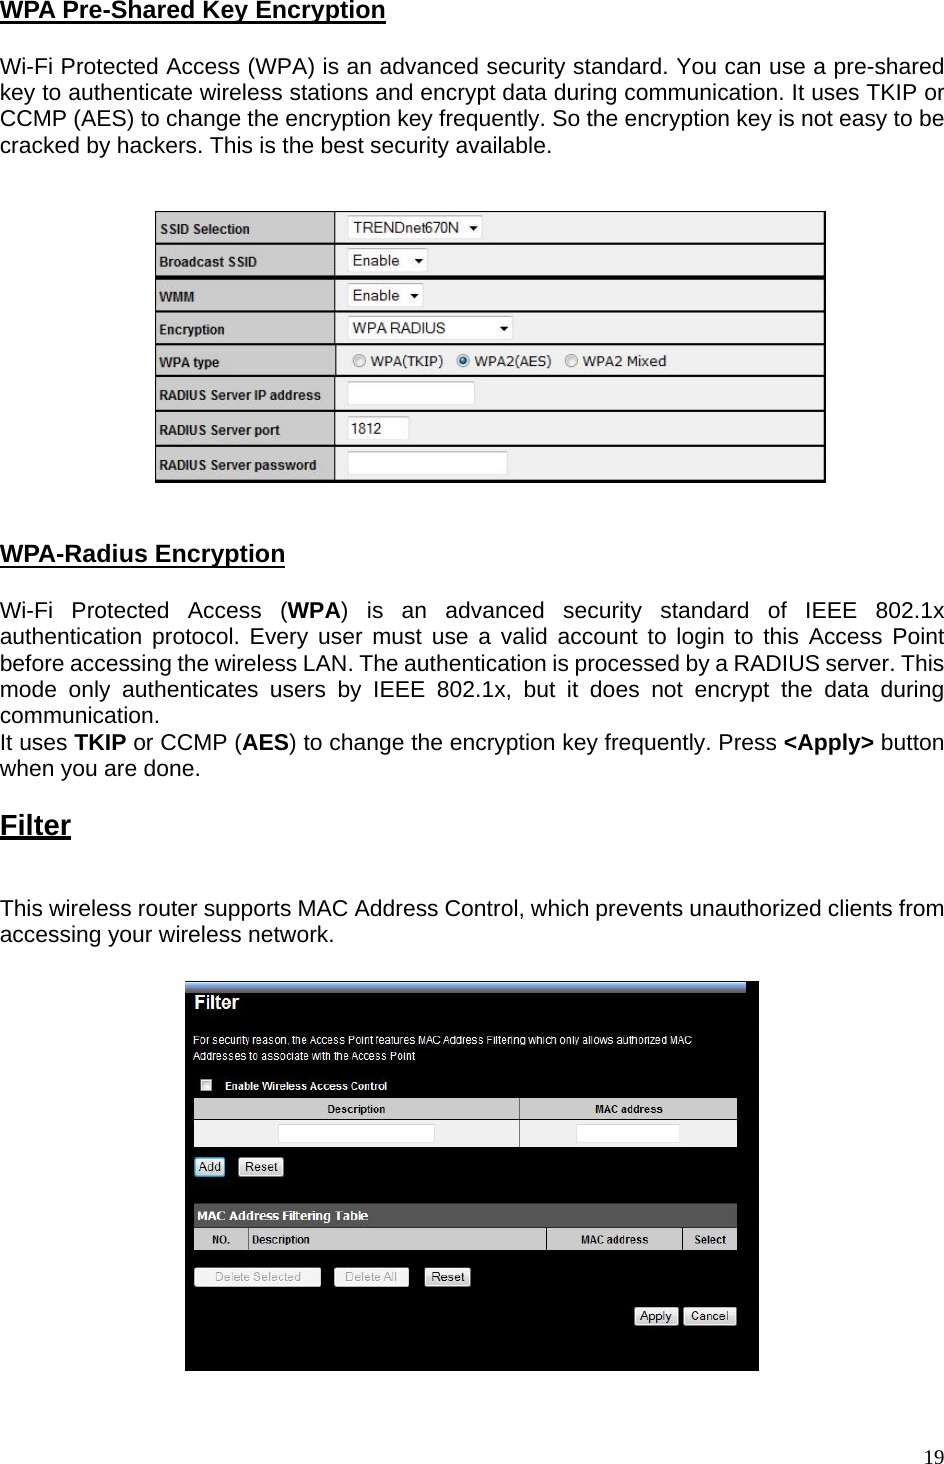  WPA Pre-Shared Key Encryption  Wi-Fi Protected Access (WPA) is an advanced security standard. You can use a pre-shared key to authenticate wireless stations and encrypt data during communication. It uses TKIP or CCMP (AES) to change the encryption key frequently. So the encryption key is not easy to be cracked by hackers. This is the best security available.      WPA-Radius Encryption  Wi-Fi Protected Access (WPA) is an advanced security standard of IEEE 802.1x authentication protocol. Every user must use a valid account to login to this Access Point before accessing the wireless LAN. The authentication is processed by a RADIUS server. This mode only authenticates users by IEEE 802.1x, but it does not encrypt the data during communication. It uses TKIP or CCMP (AES) to change the encryption key frequently. Press &lt;Apply&gt; button when you are done.  Filter  This wireless router supports MAC Address Control, which prevents unauthorized clients from accessing your wireless network.       19